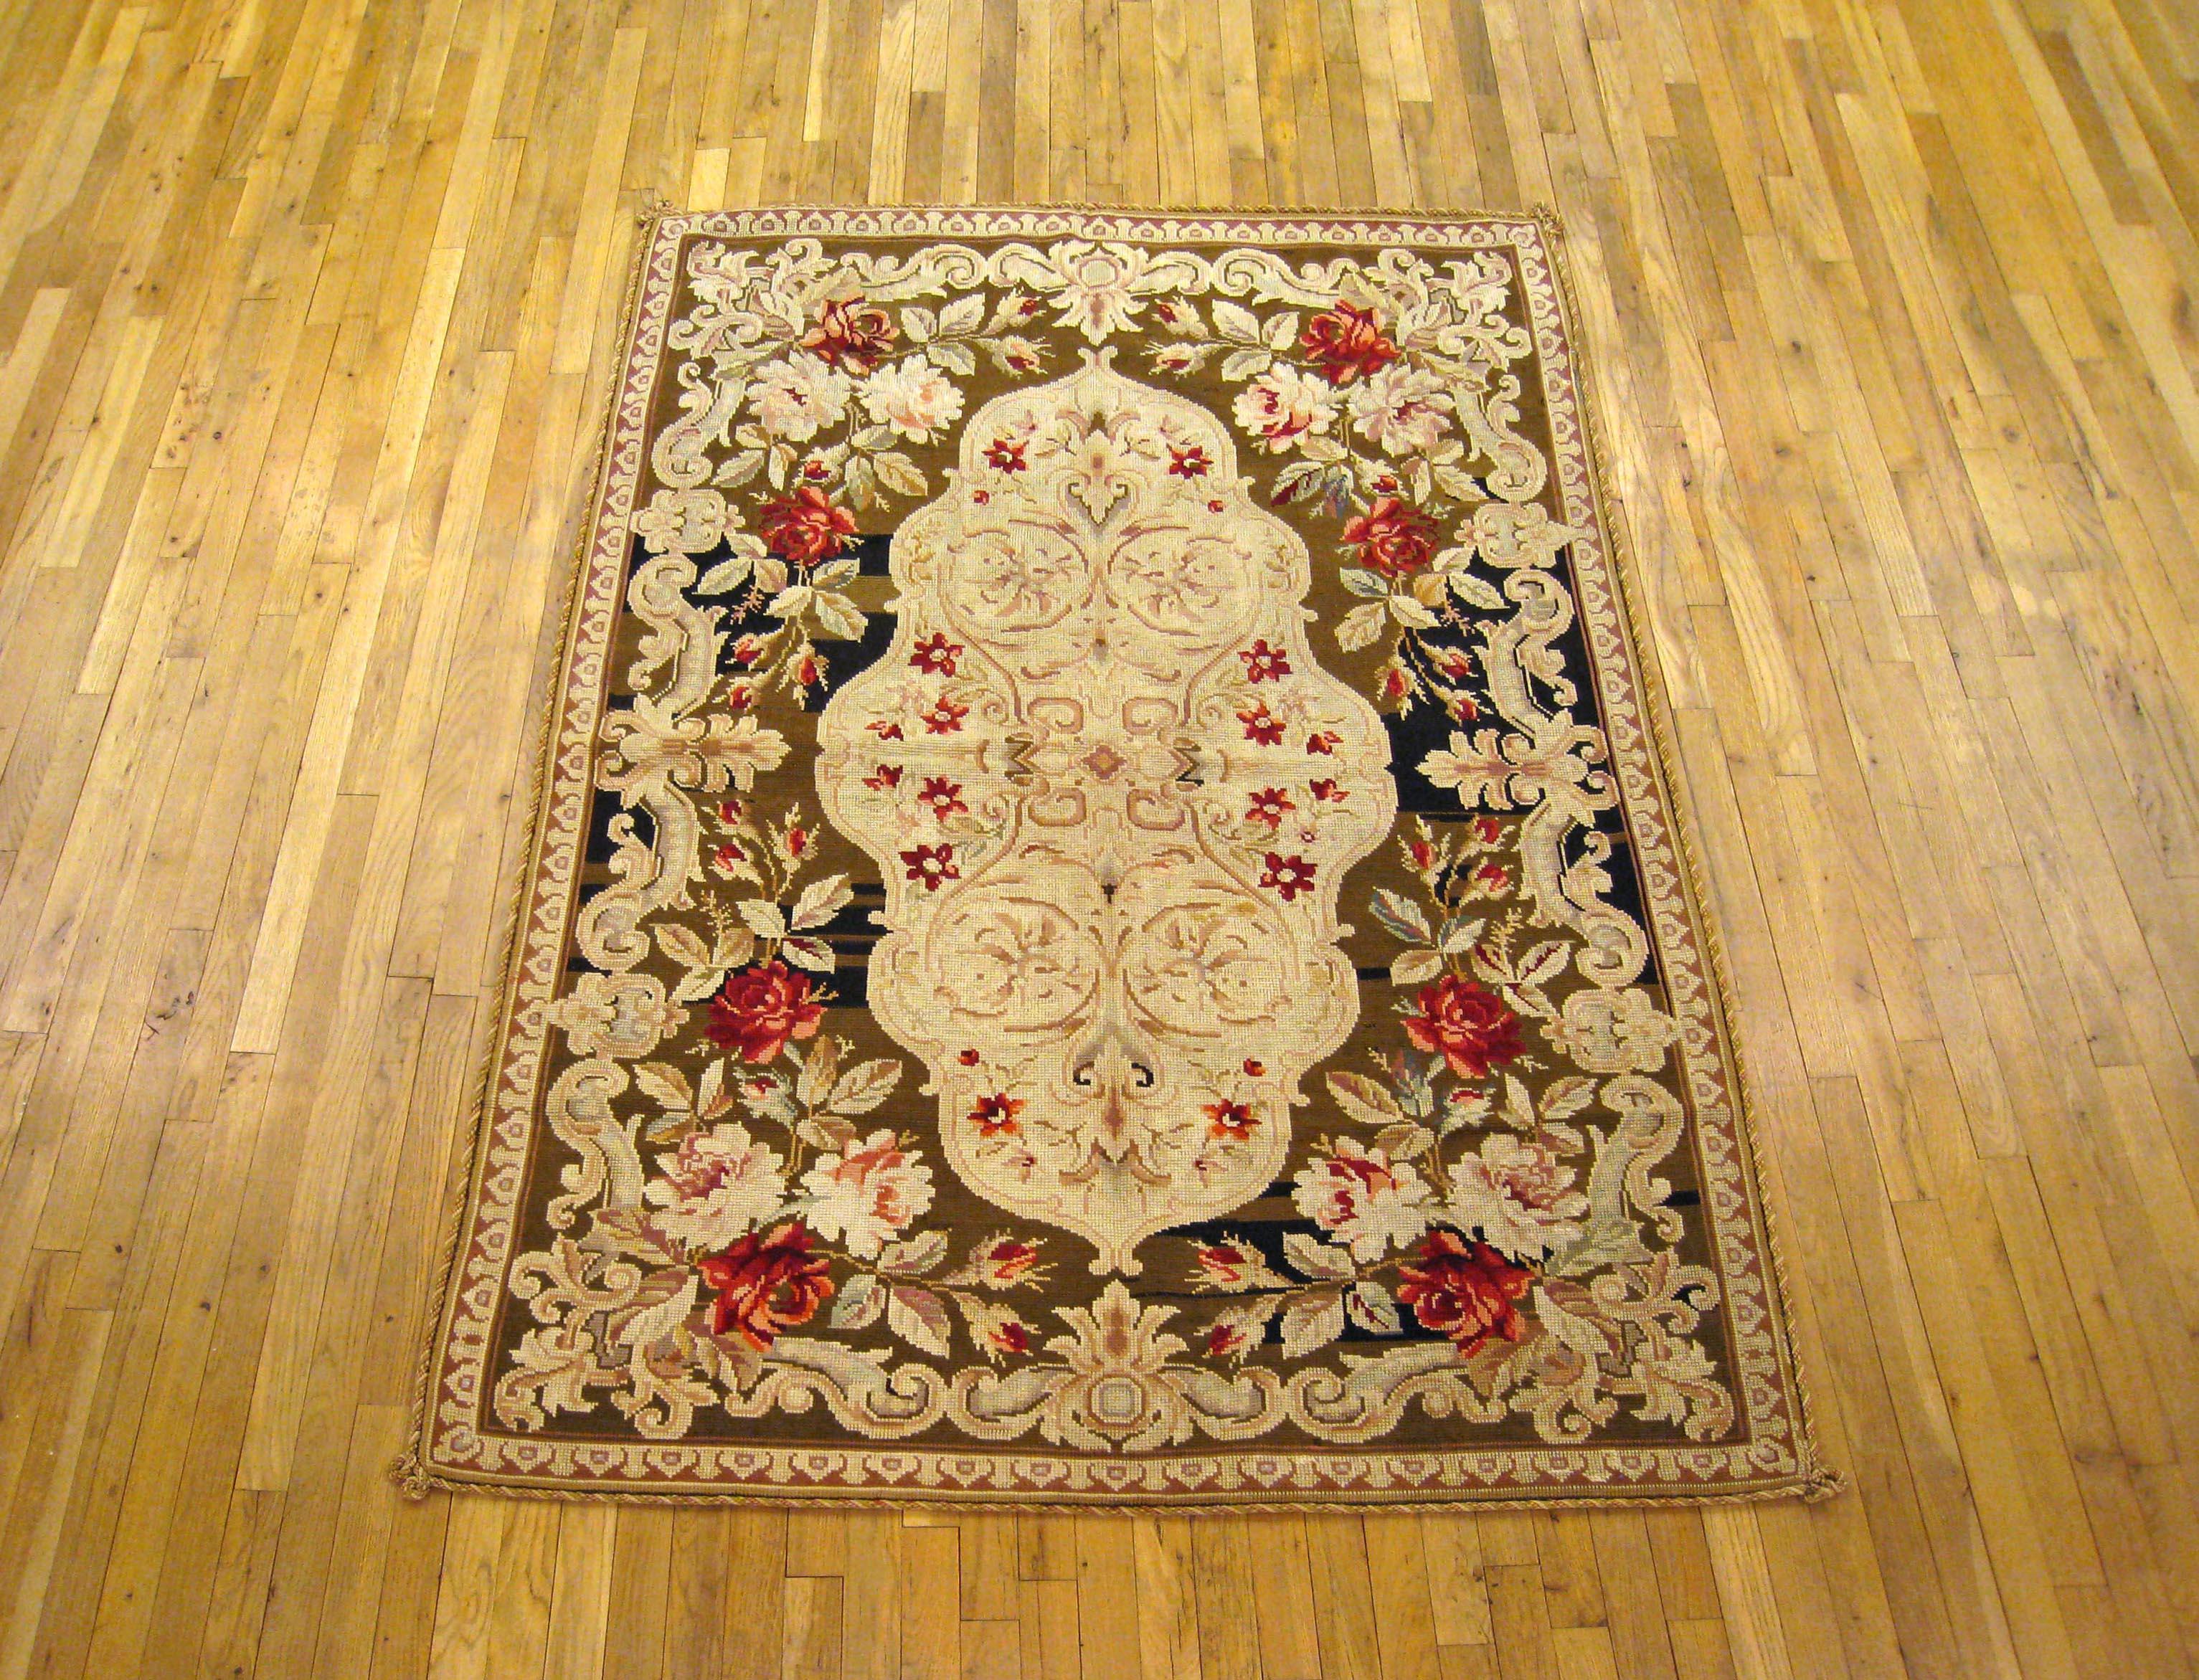 Antique Portuguese needlepoint flat-weave rug handwoven with a symmetrical floral design, ivory center, and bold splashes of color in the border. Can be used as a wall hanging or a floor covering. Measures: 6'7